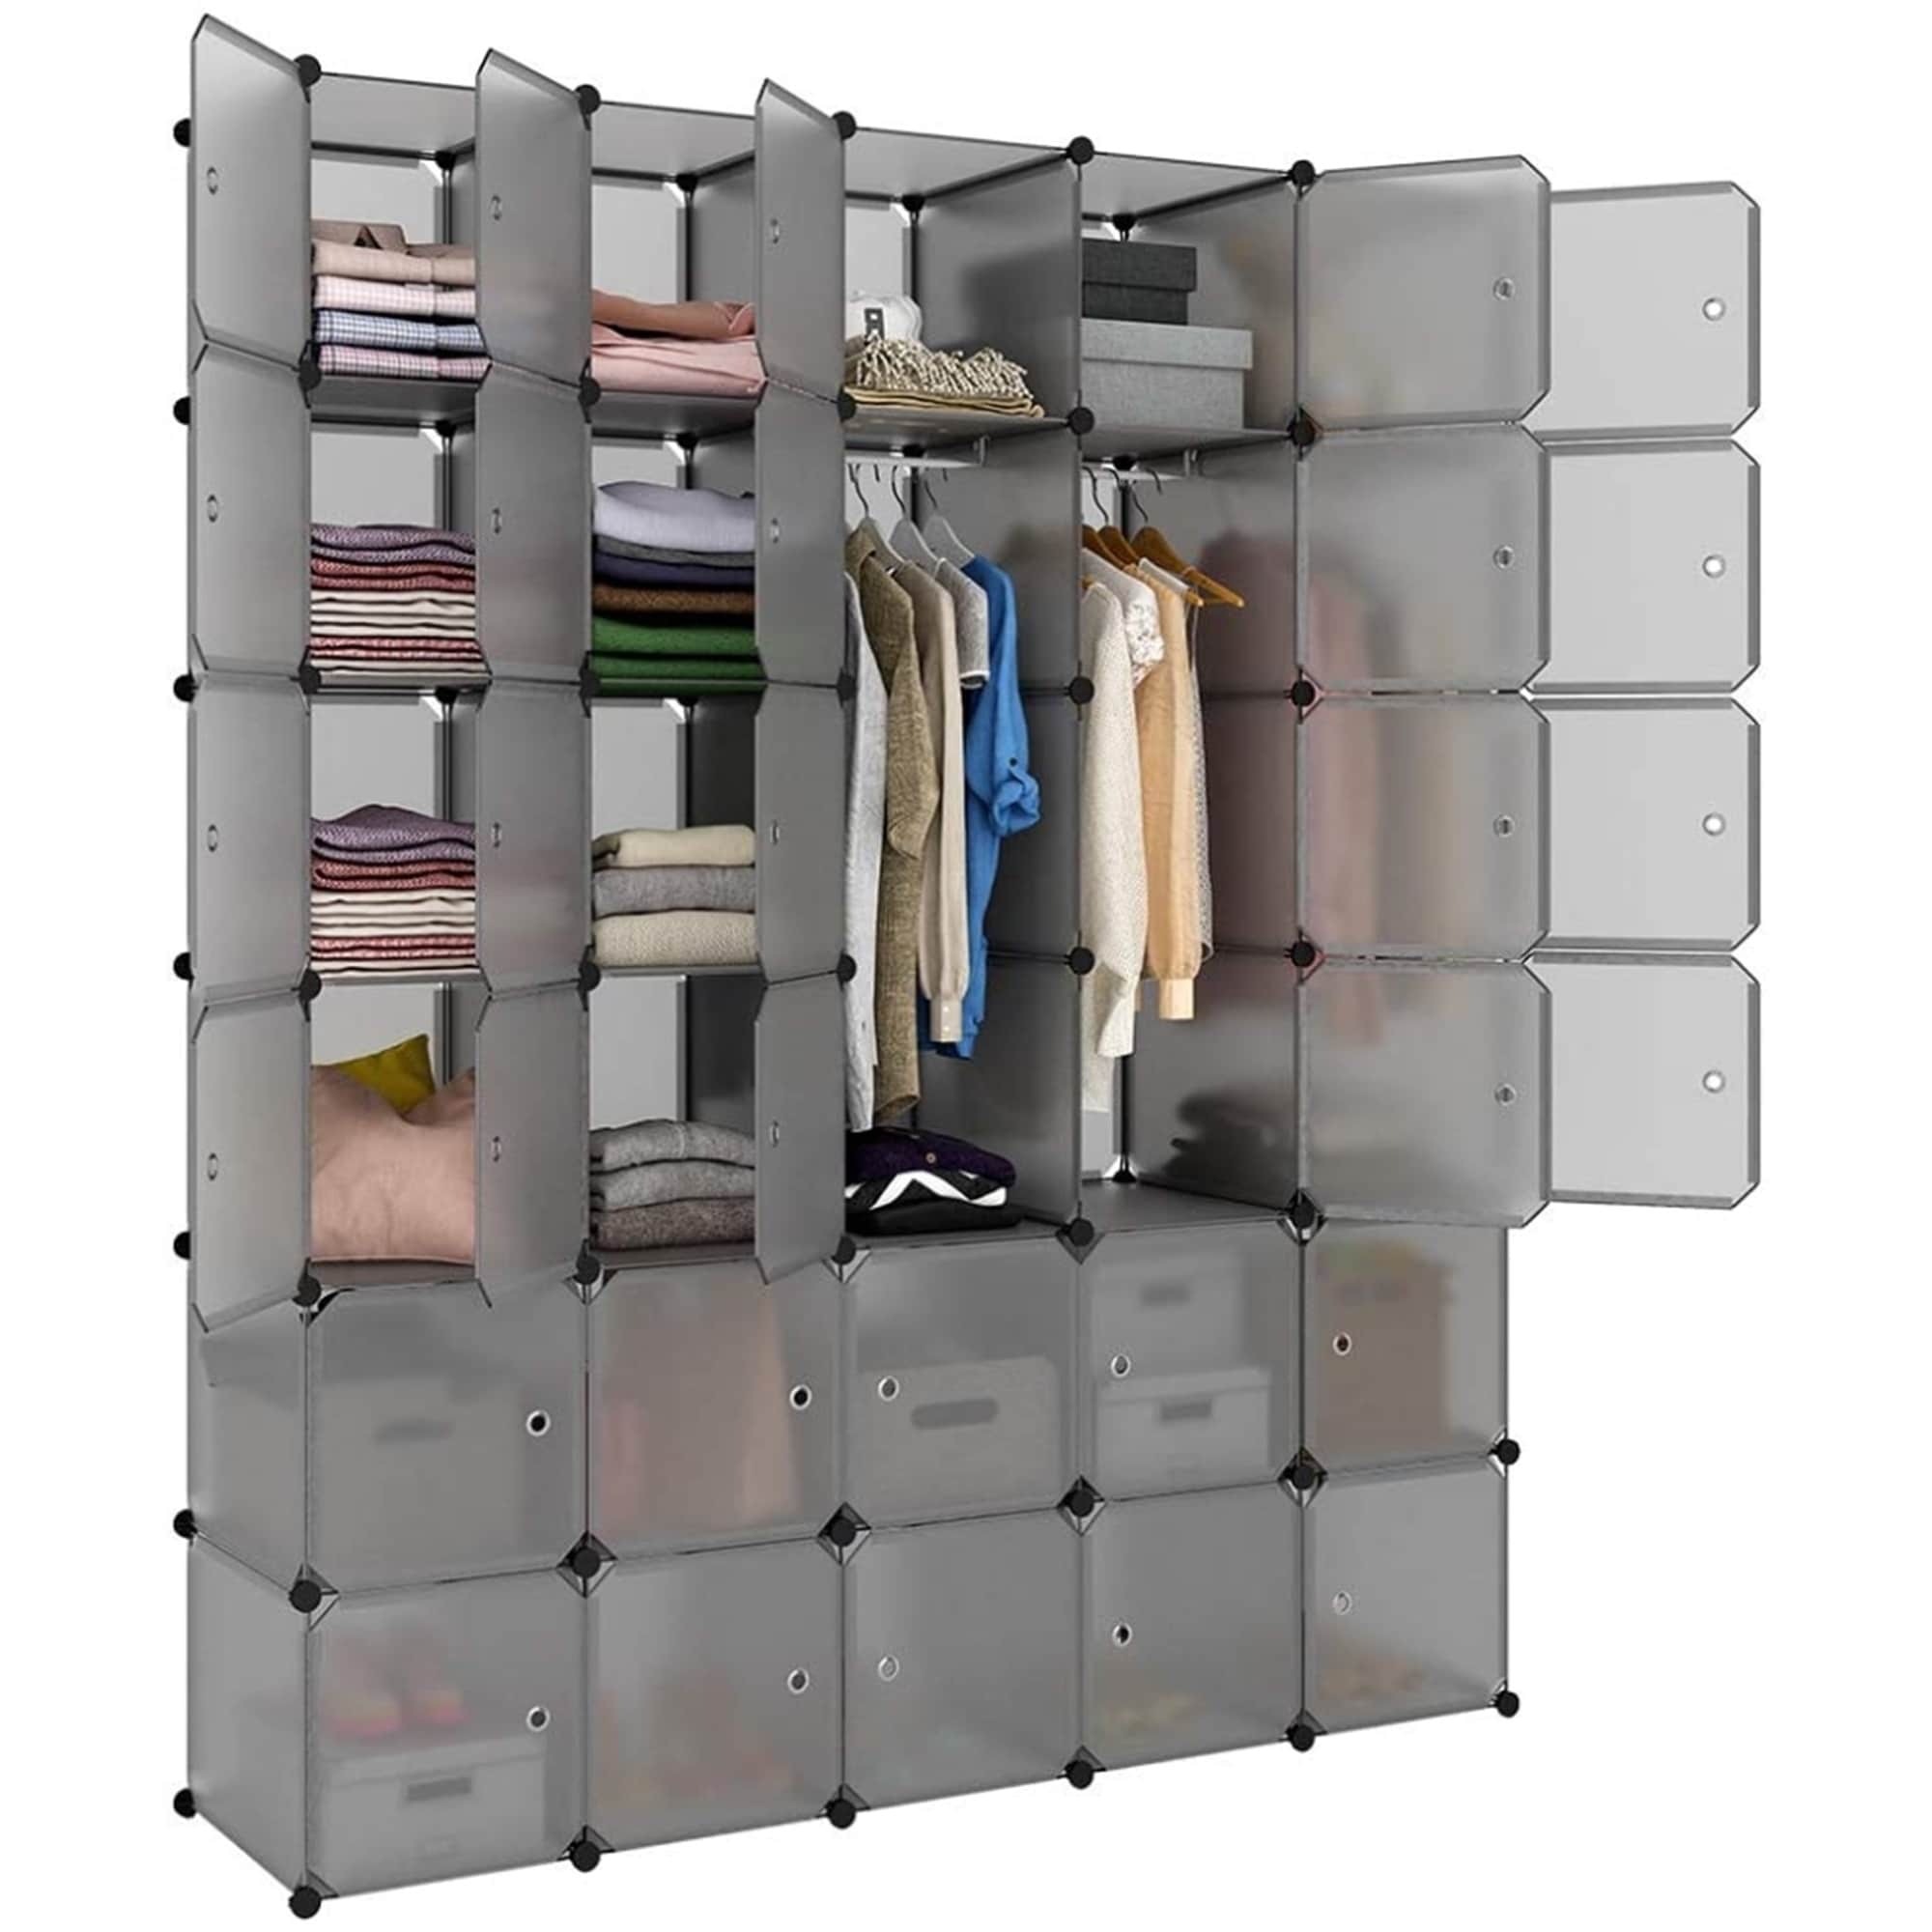 https://ak1.ostkcdn.com/images/products/is/images/direct/48eb552cba48100eefdb7a1cff164767f3160c8a/30-Cube-Modular-Closet-Organizer-Cabinet%2C-Cubby-Shelving-Storage-Cubes.jpg